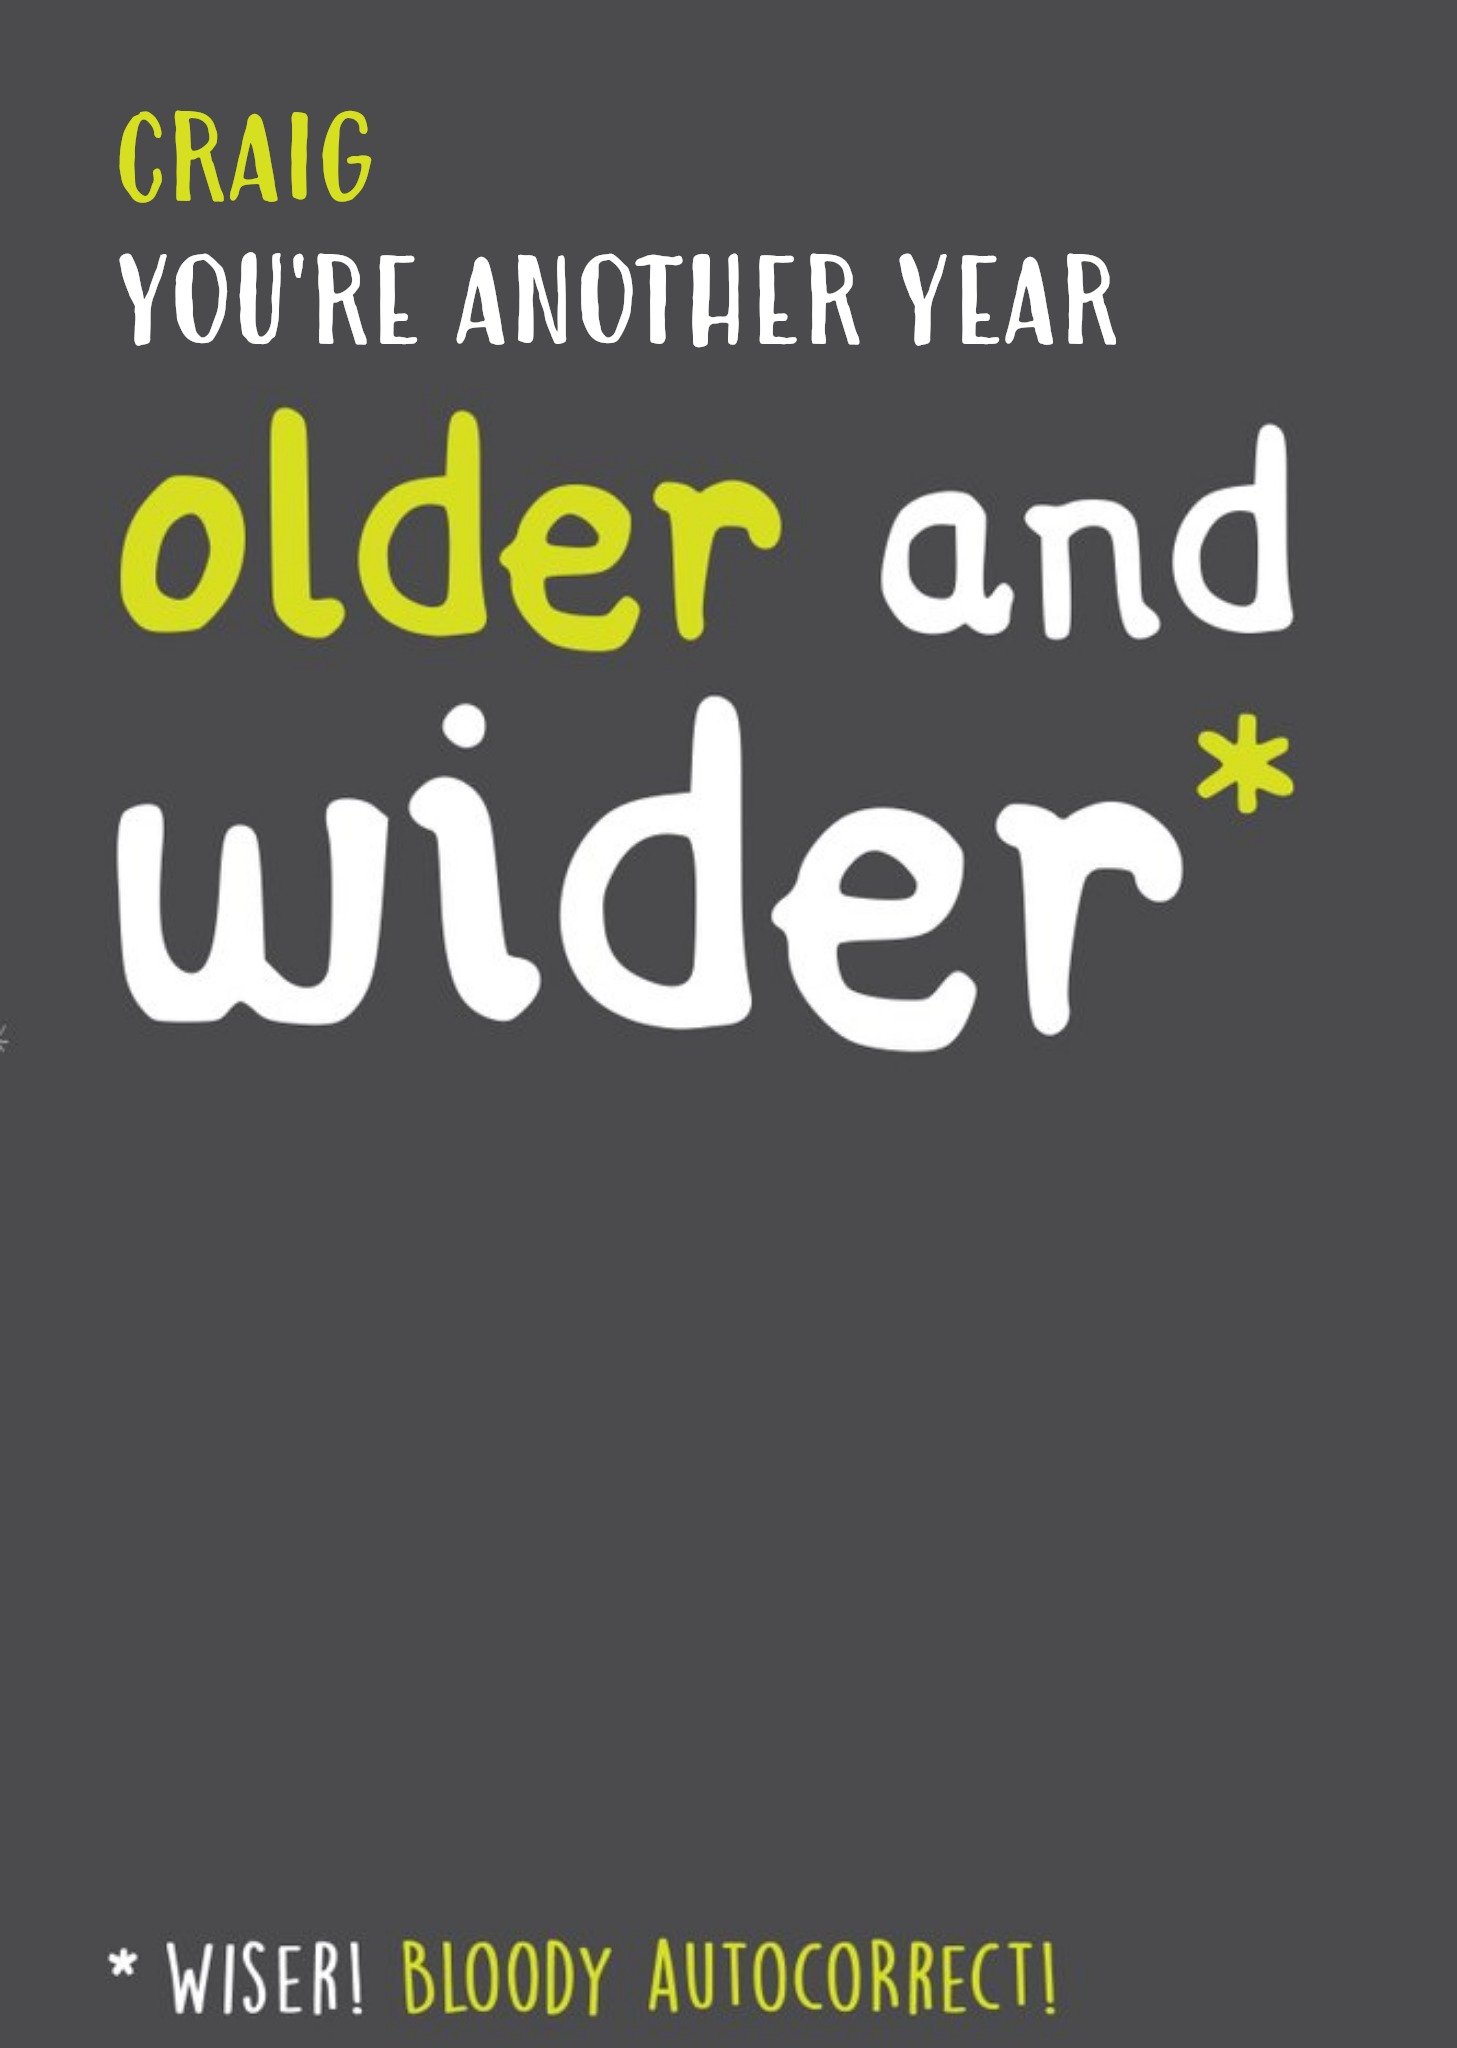 Moonpig Old Age Funny Birthday Card - You're Another Year Older And Wider*, Large